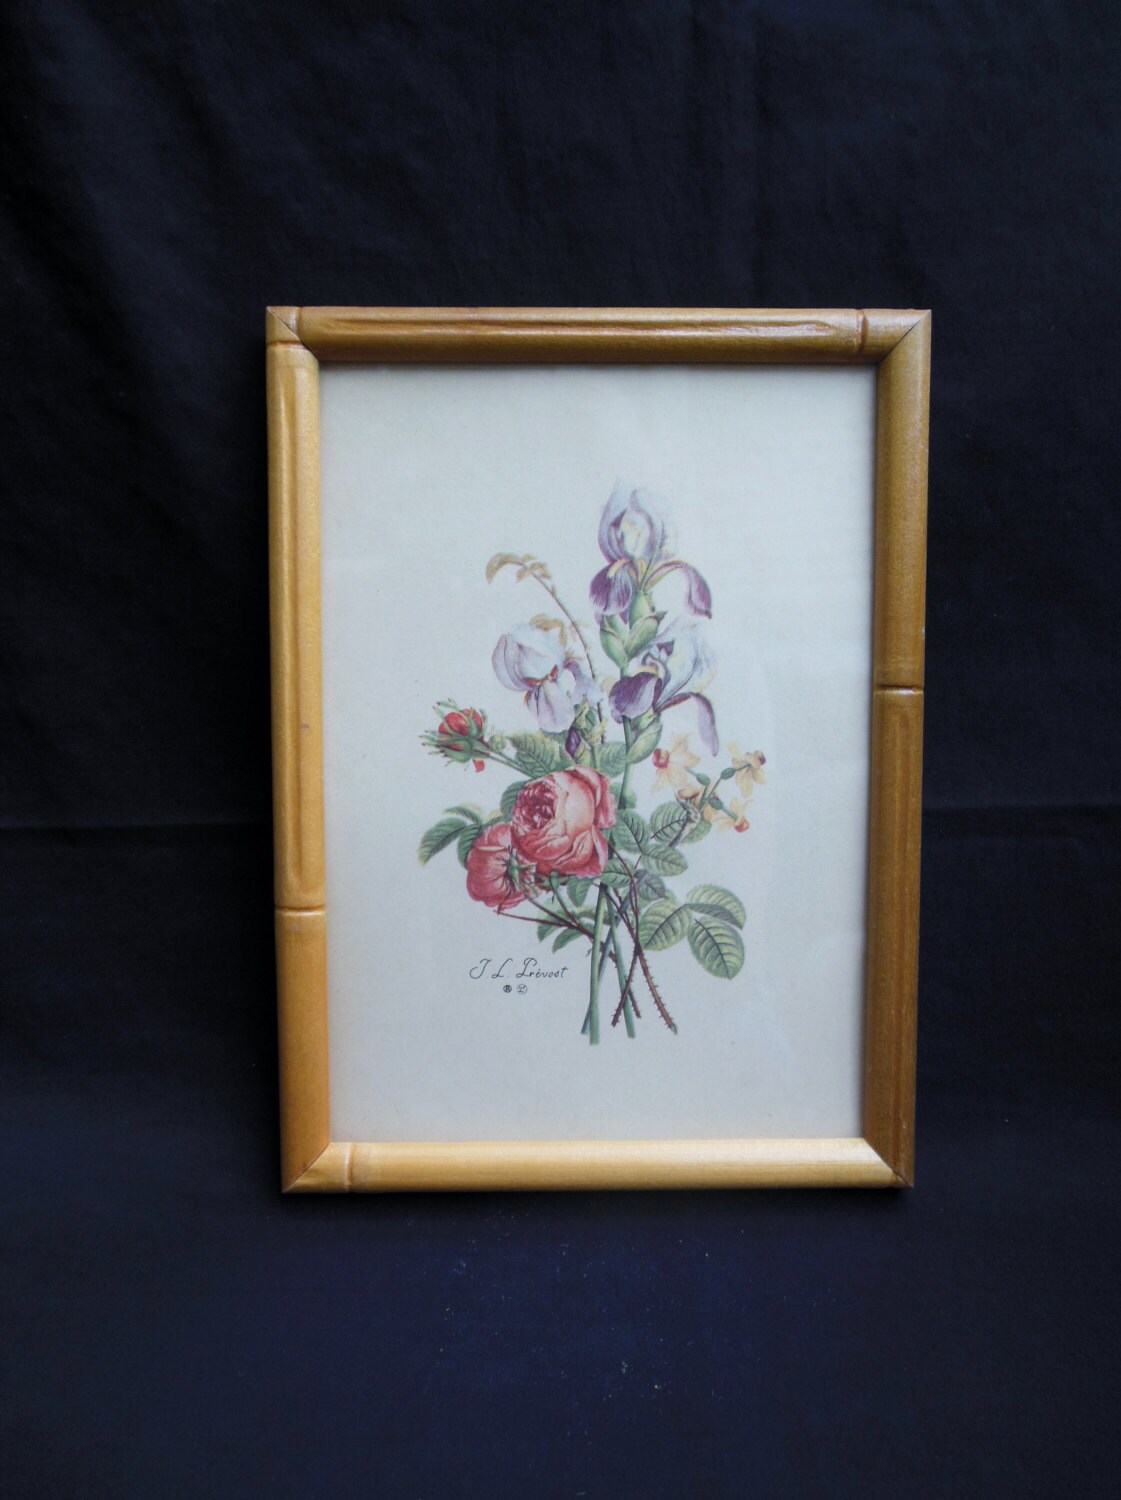 Framed Floral Print by J. L. Prevost Little Picture with Roses